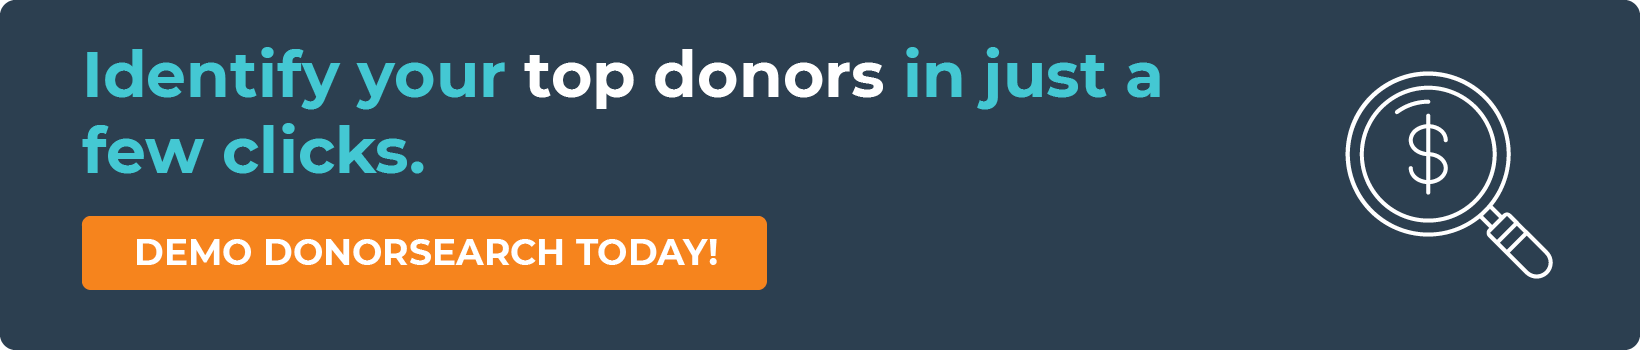 Click through to demo DonorSearch, the top wealth and philanthropic screening tool. 